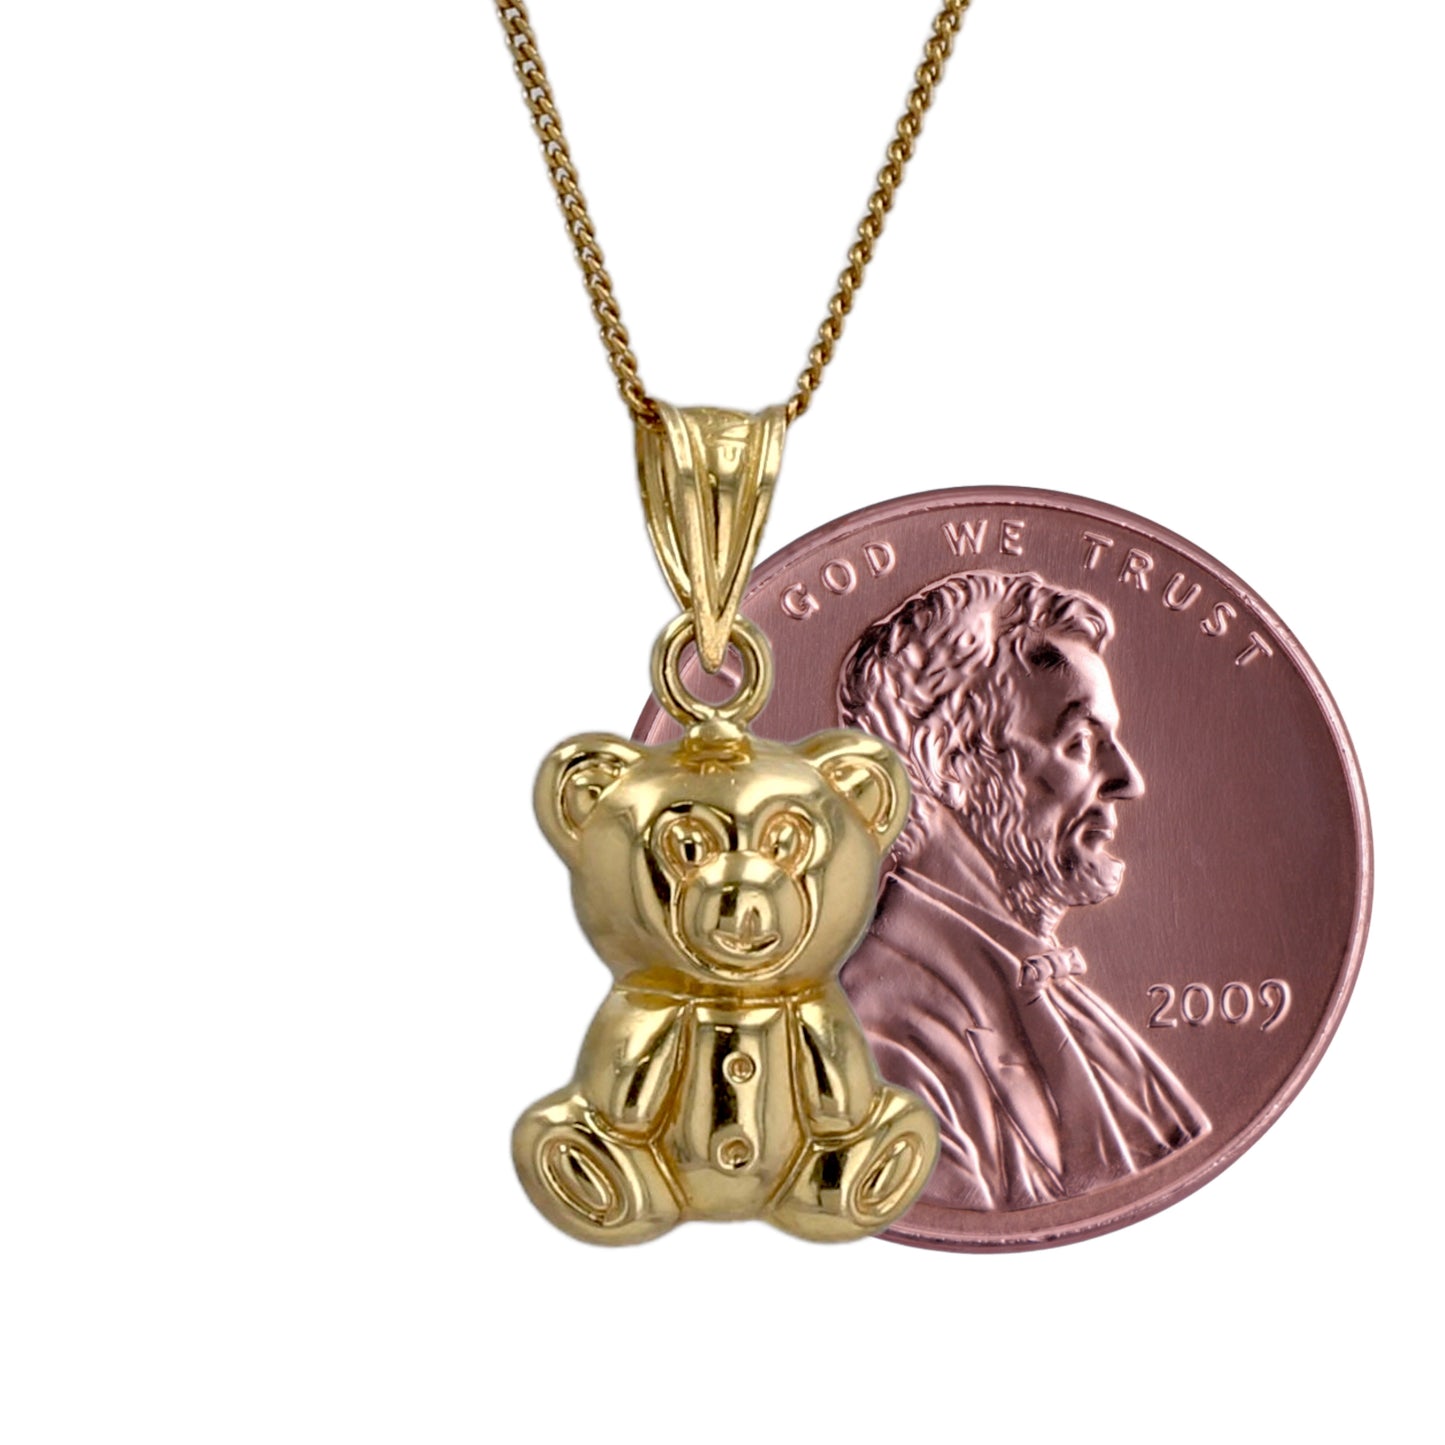 10k Yellow gold solid baby miami cuban link chain teddy bear pendant -437394